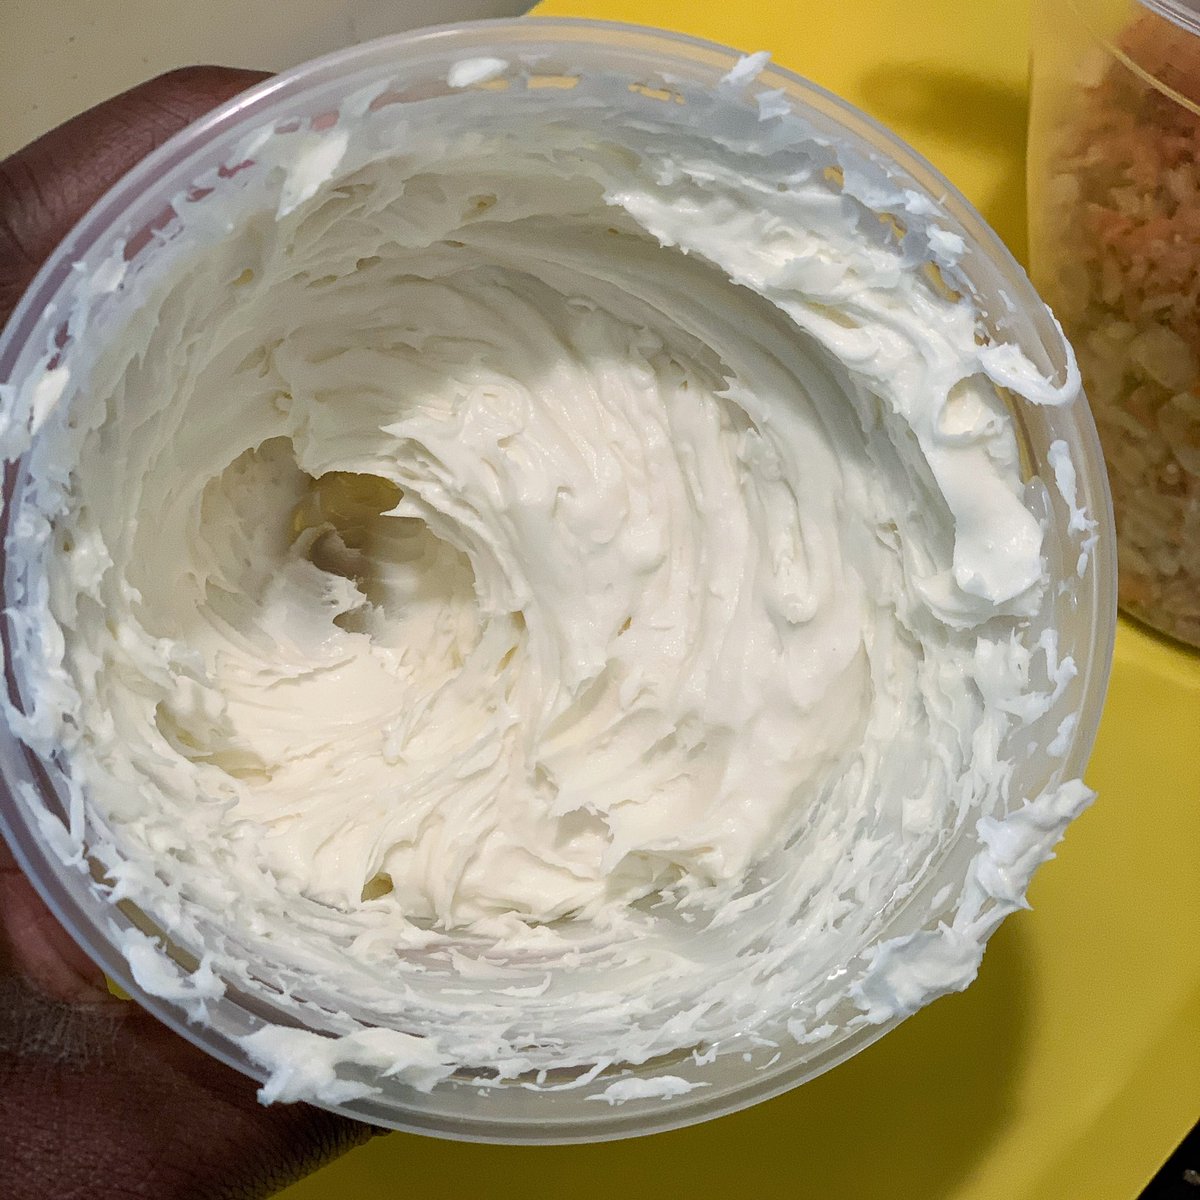 when I said I was going to make an entremet, what I really meant was that I was going to make it over the course of two weeks cuz I lack motivation anyway, I made a whipped white chocolate ganache with smoked maldon that I’m struggling not to eat with a spoon  #humblebragdiet